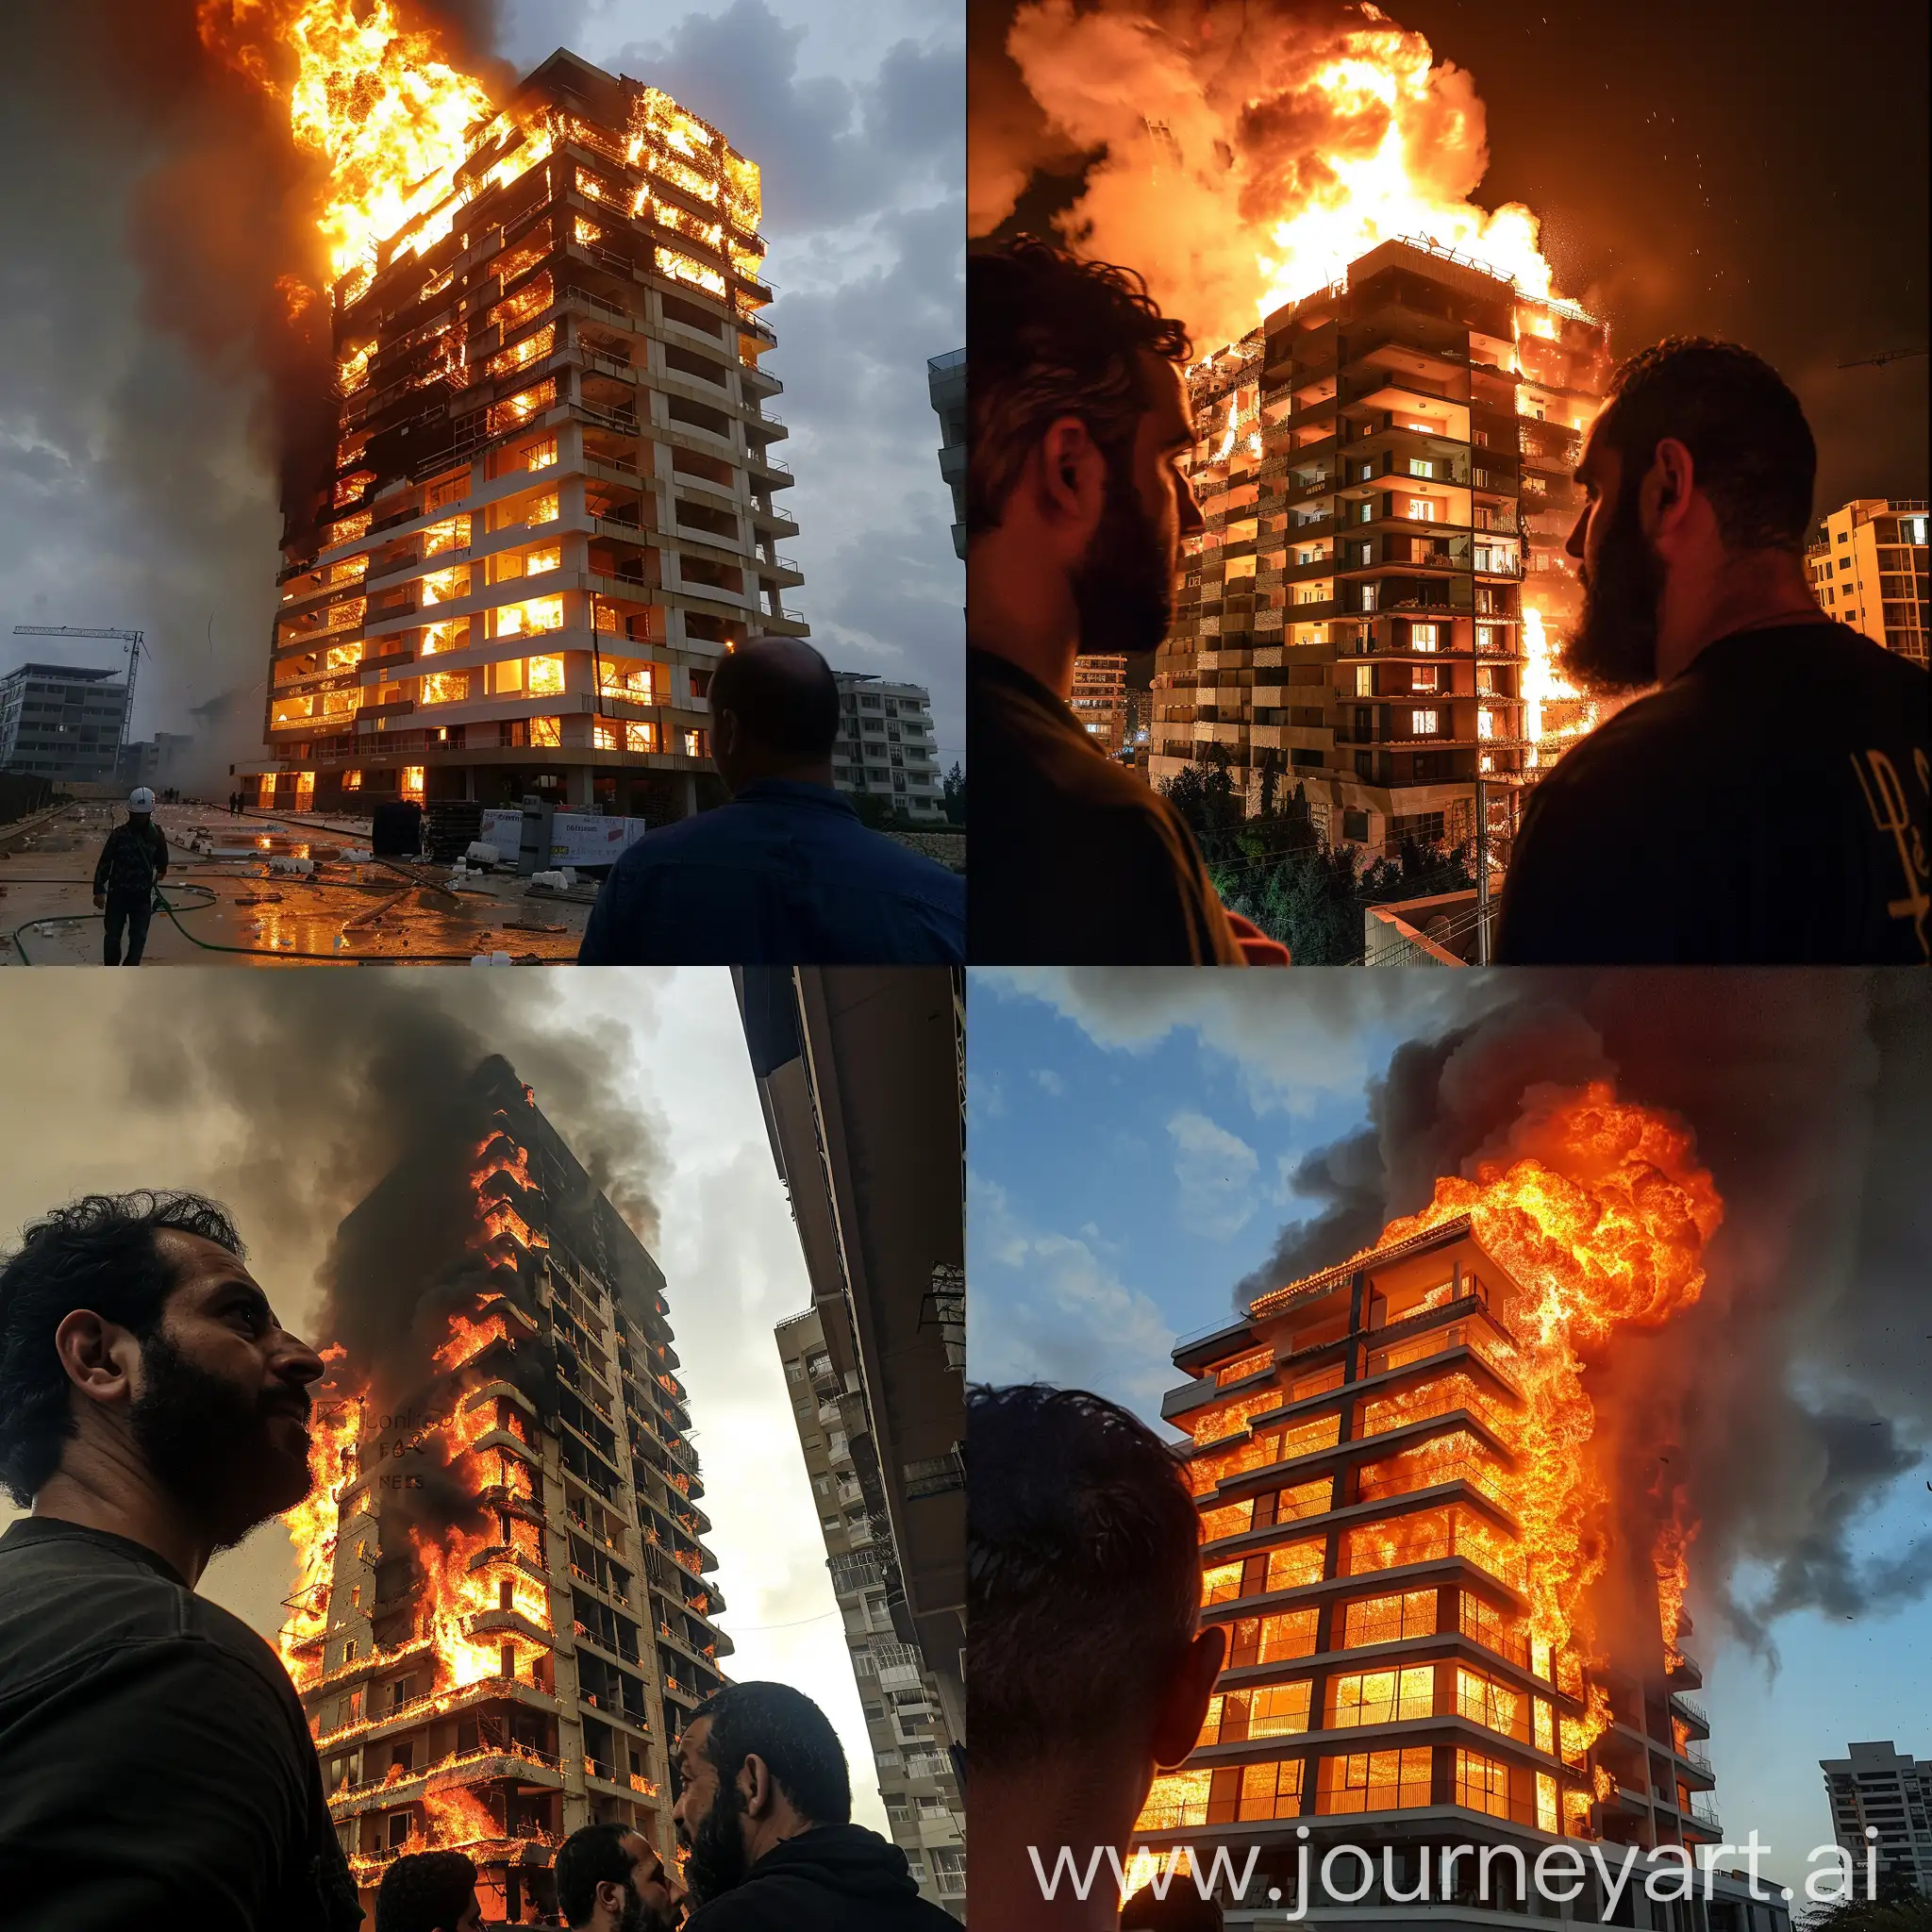 Lebanese builders in bewilderment watch apartments made of polystyrene engulf in flames 